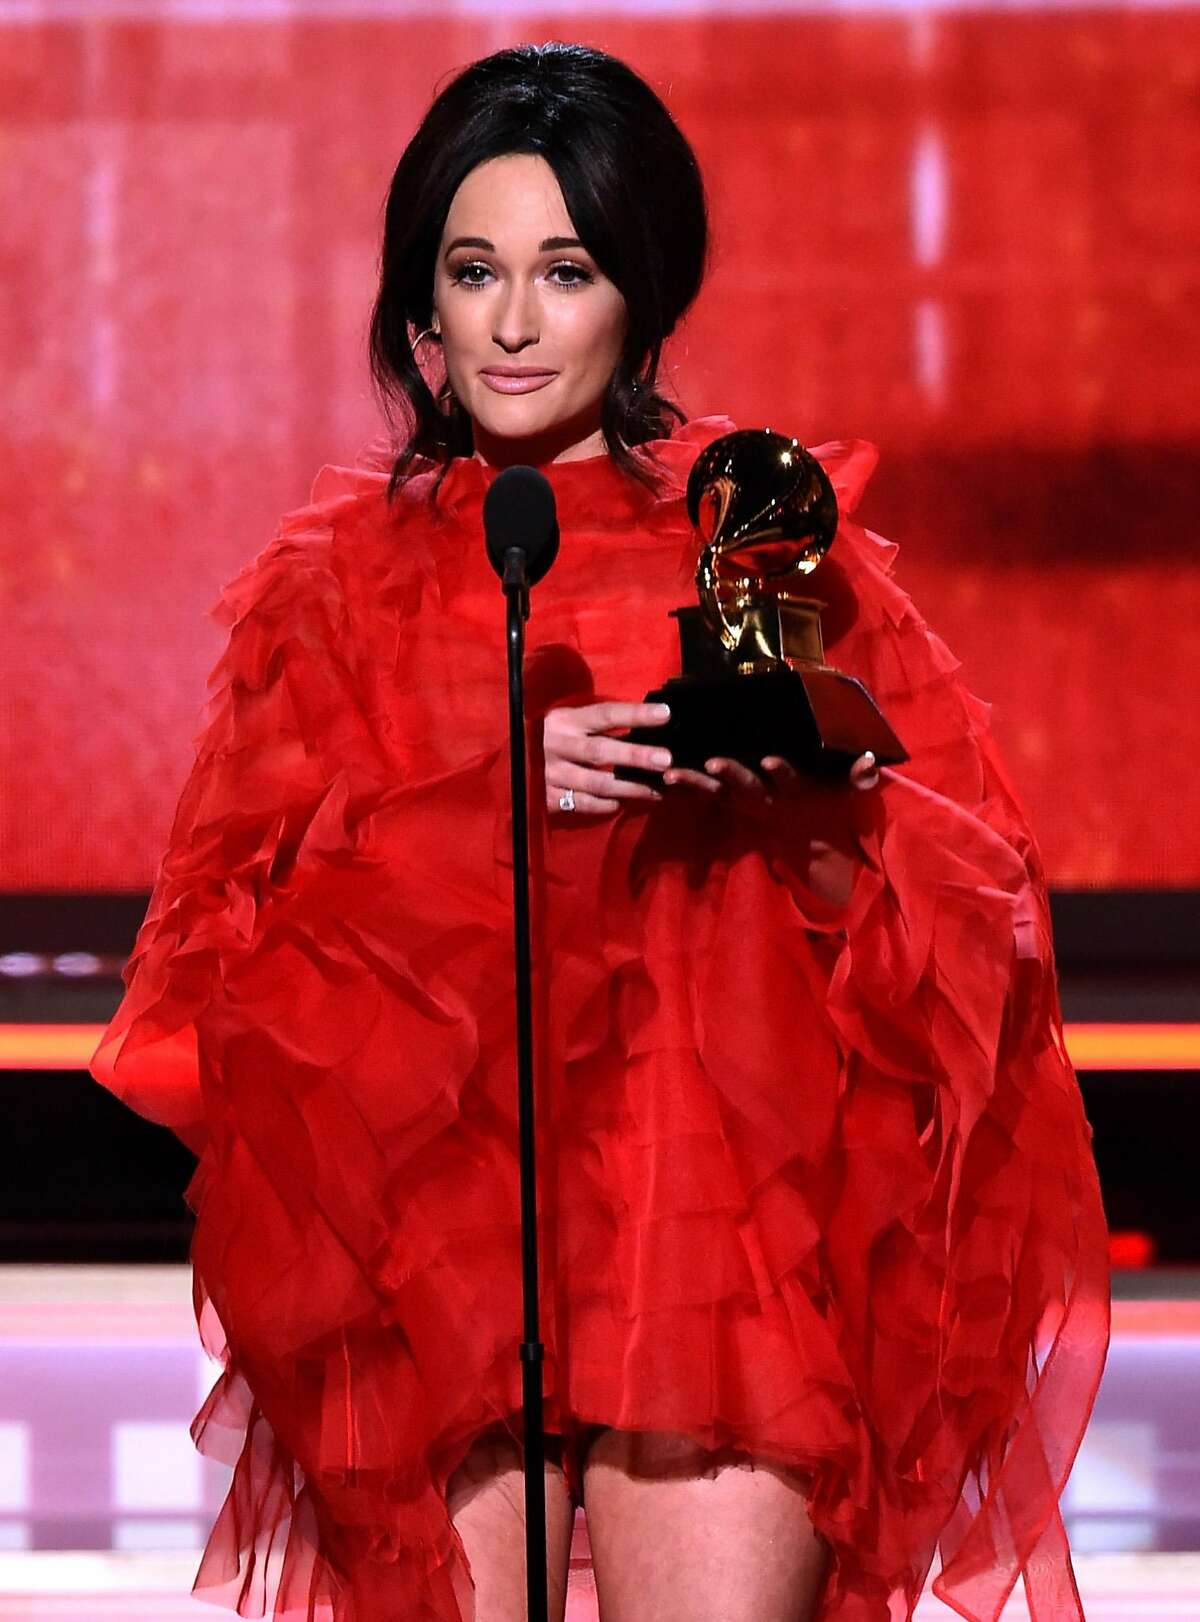 Kacey Musgraves’ 'Golden Hour' wins Grammy for Album of the Year